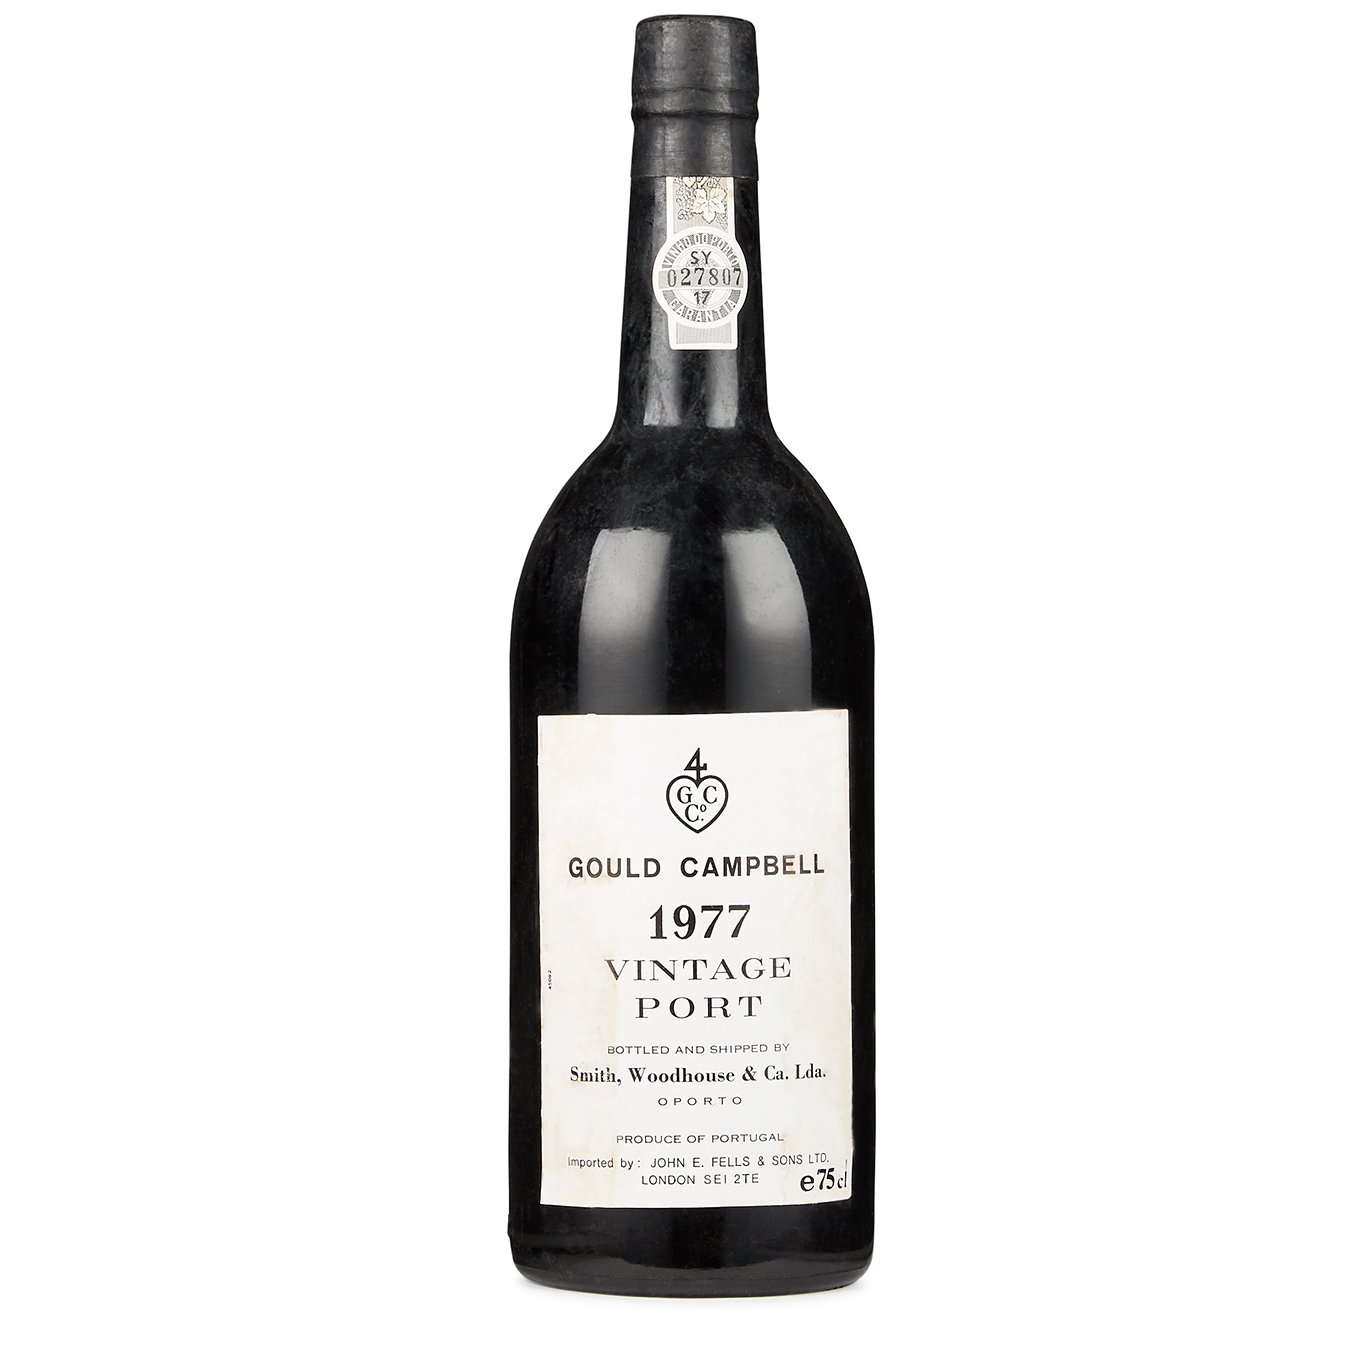 Gould Campbell Vintage Port 1977, Portugal, Douro, ABV 20%, 750ml Port And Fortified Wine